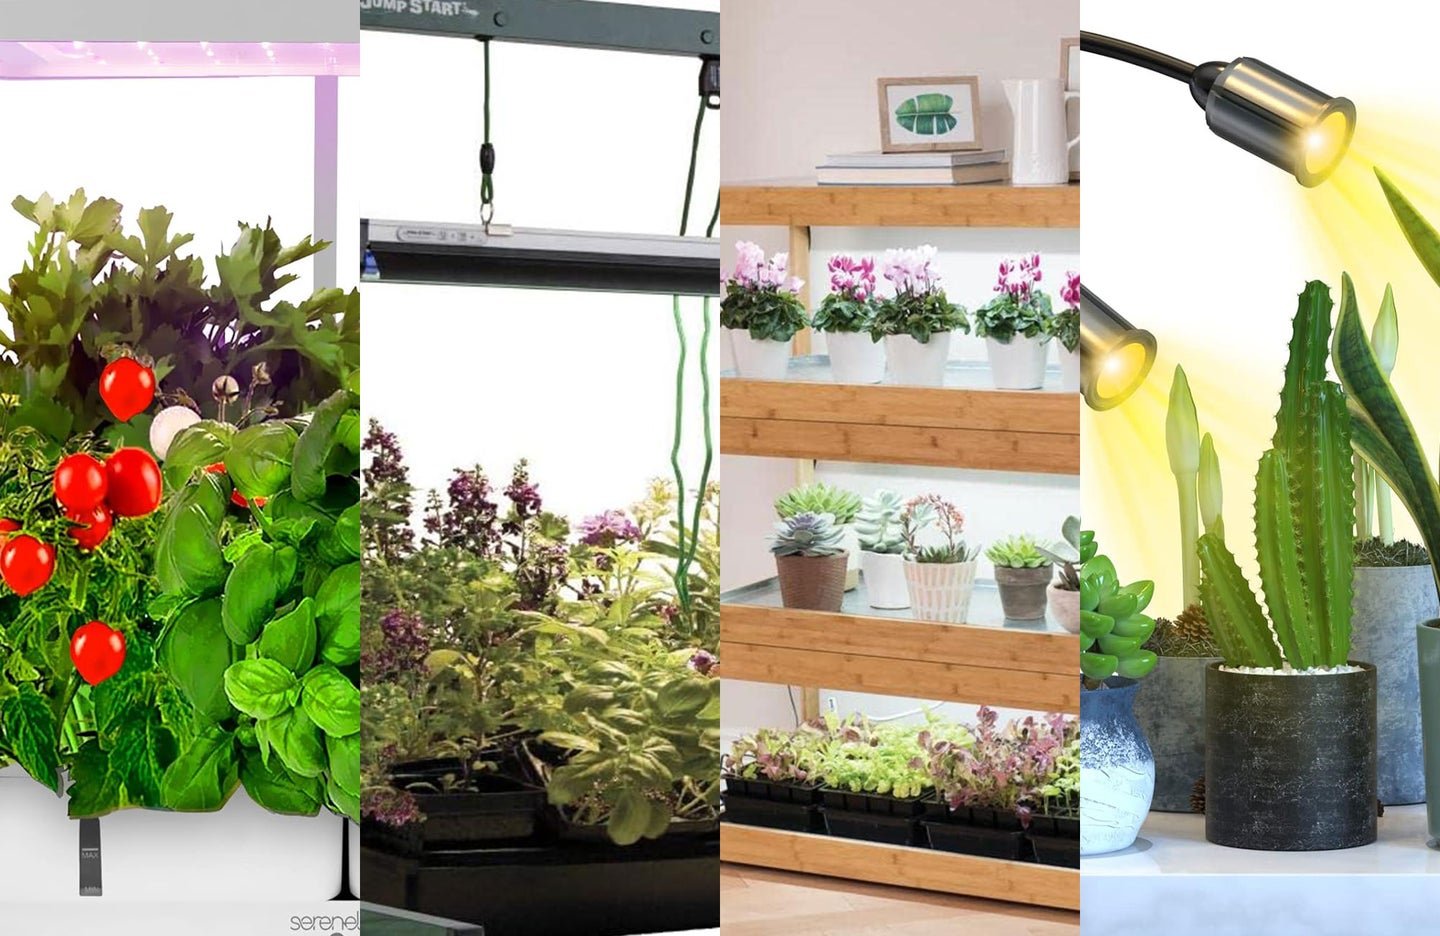 A lineup of the best grow lights on a plain background